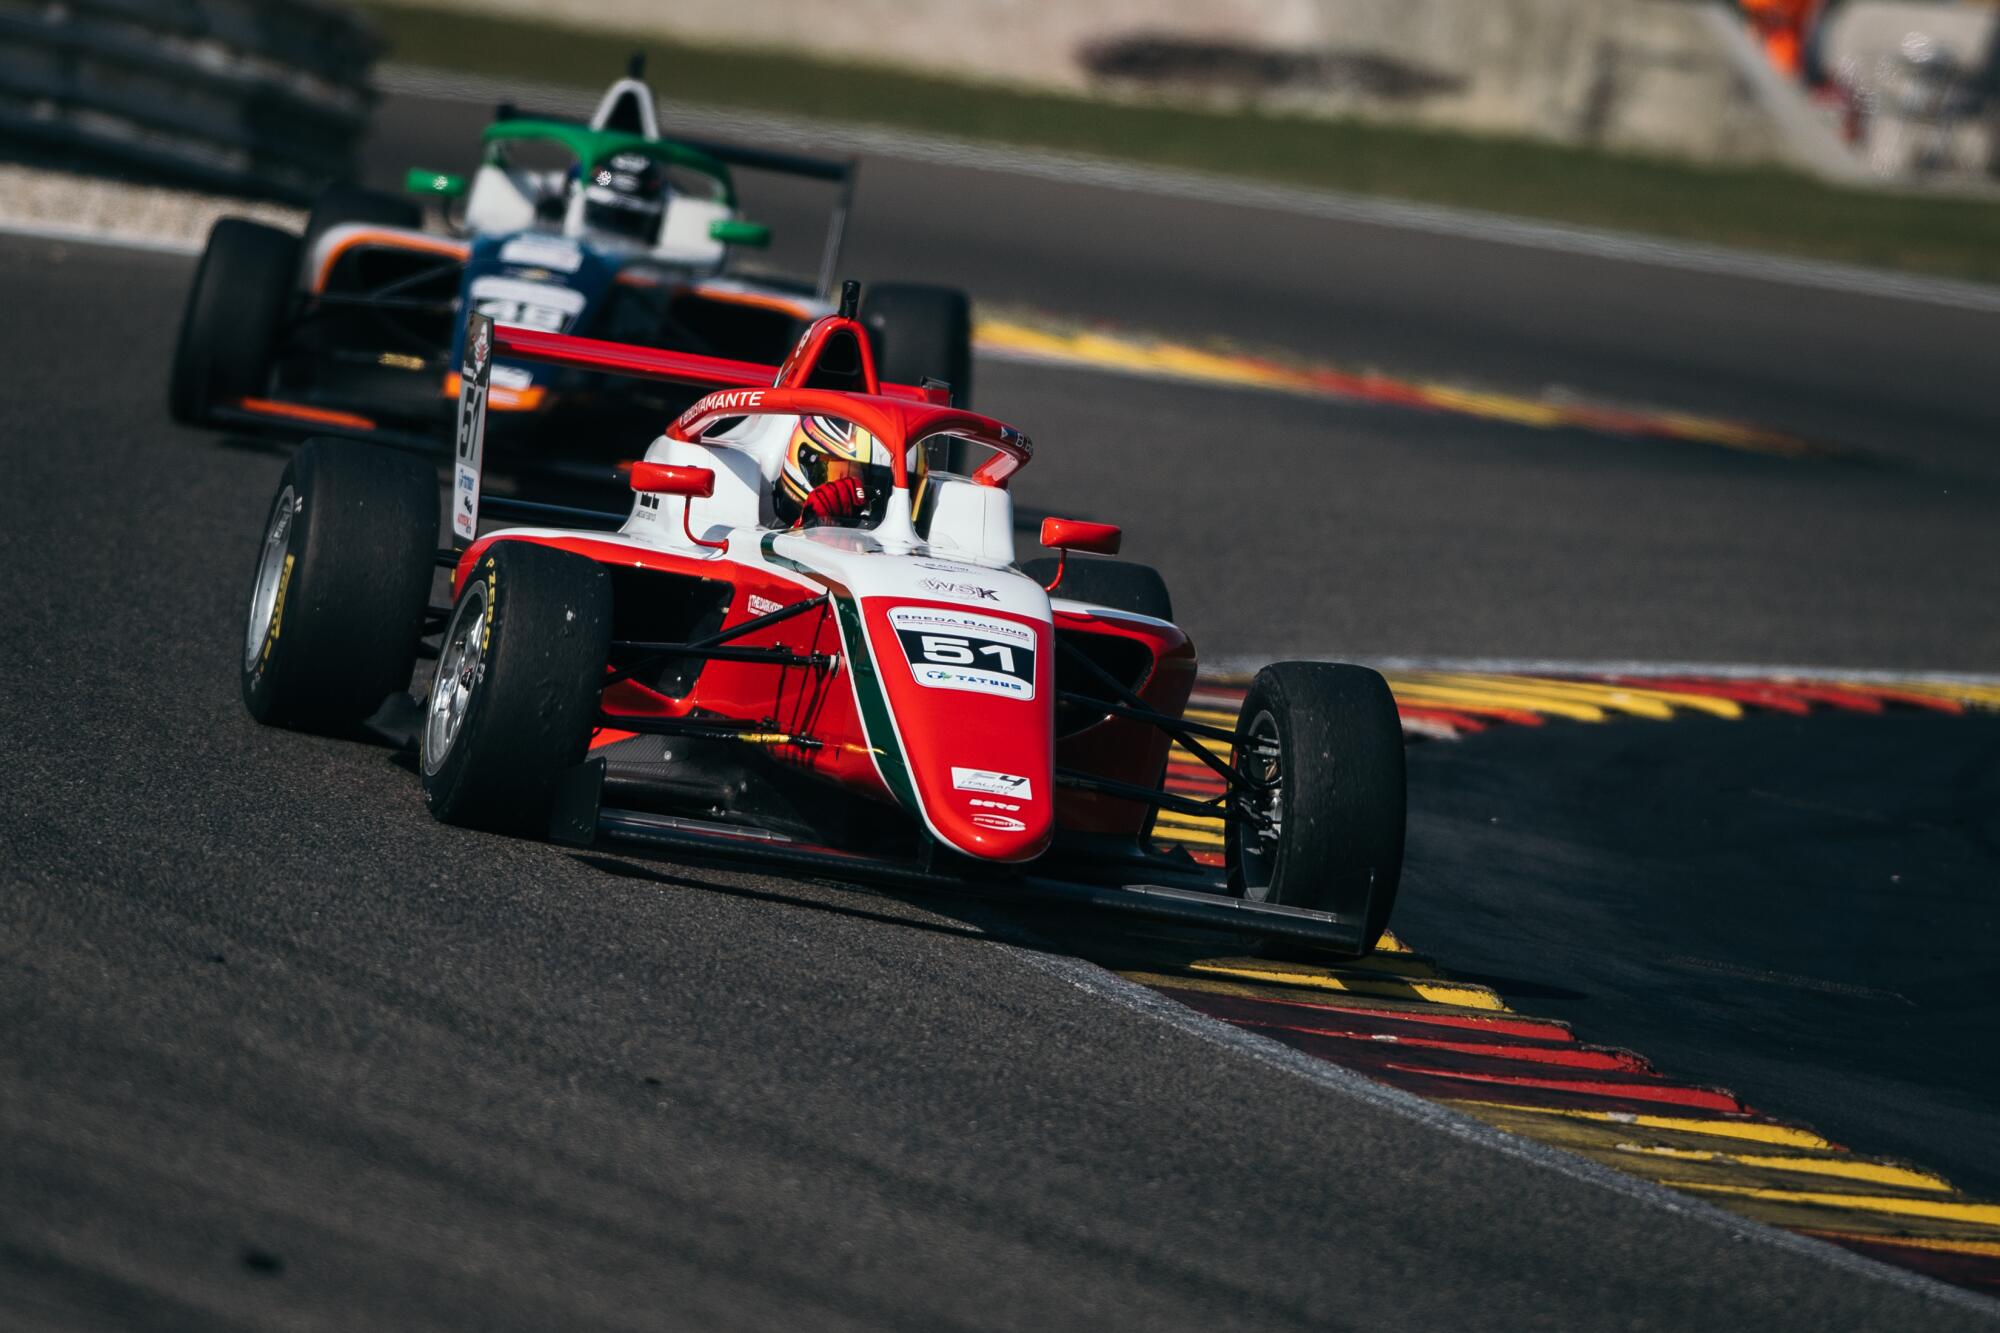 Bianca Bustamante races at the Circuit de Catalunya during the Barcelona round of the 2023 F1 Academy series.